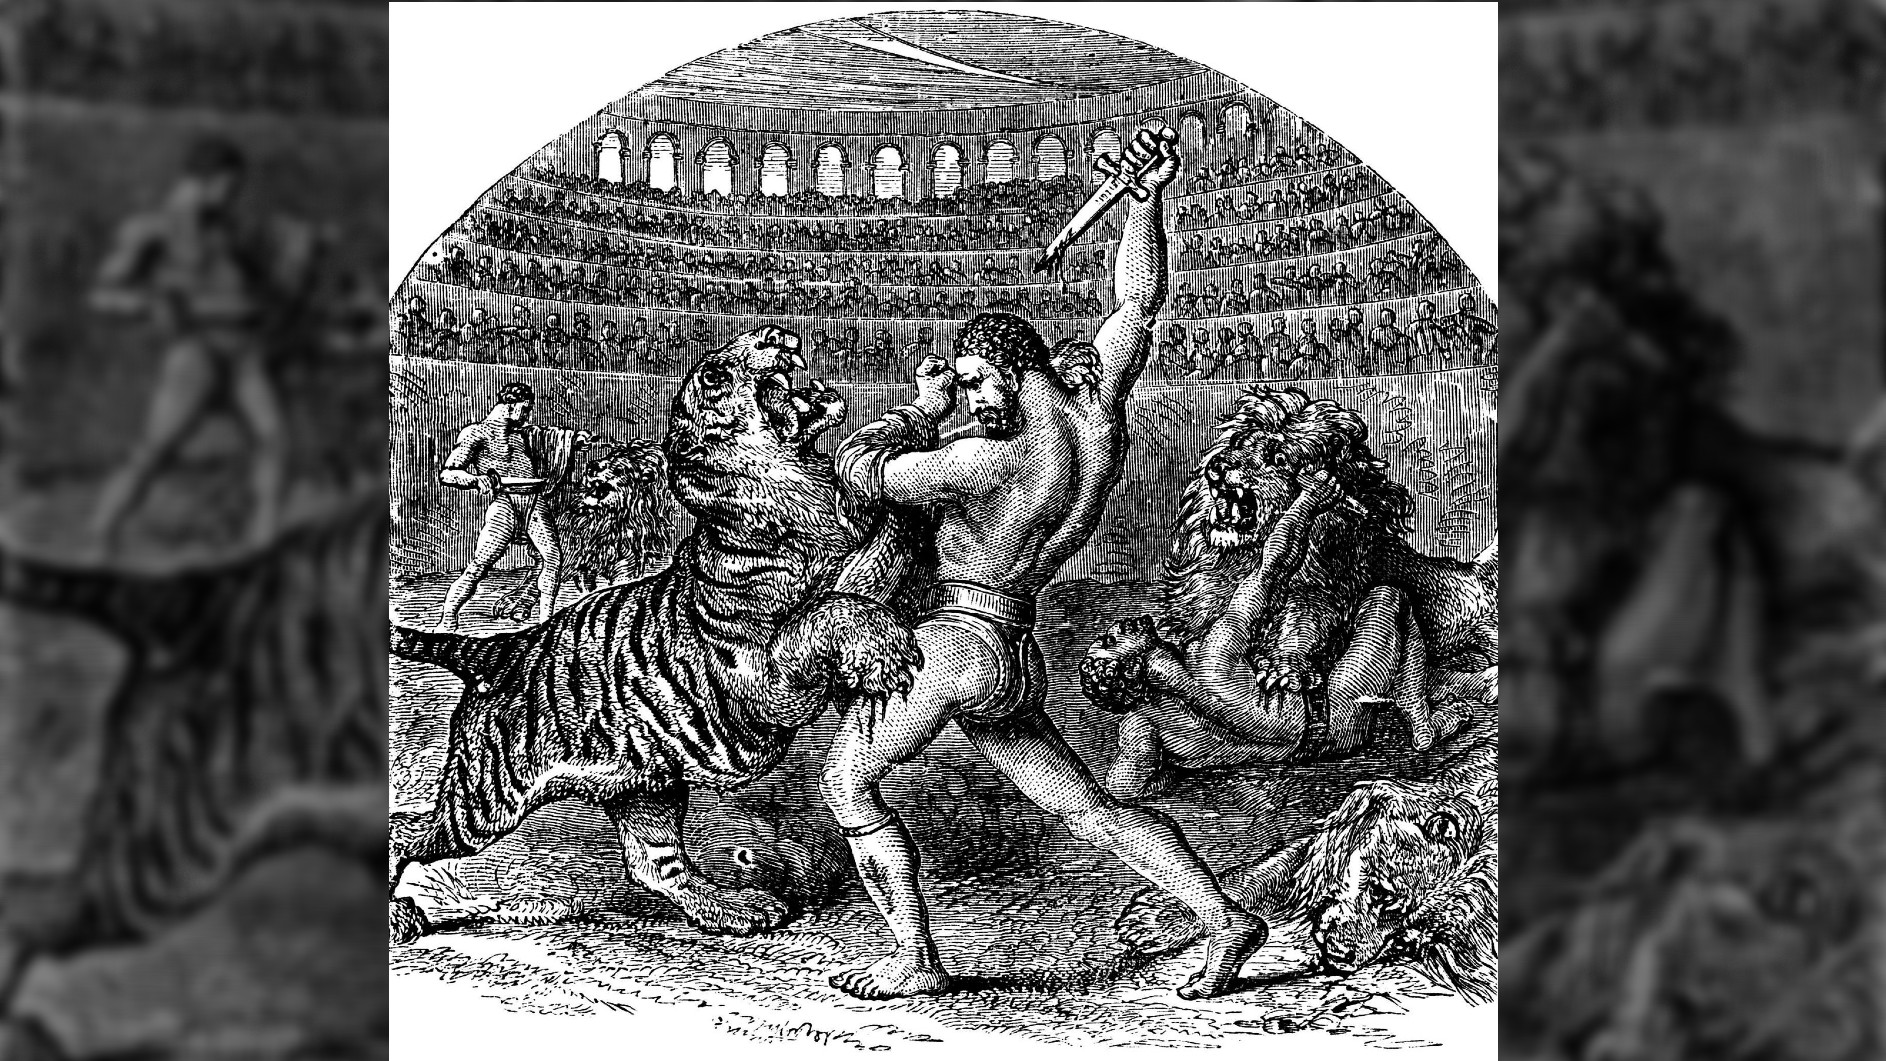 An engraving of a gladiator fighting a tiger in an amphitheater